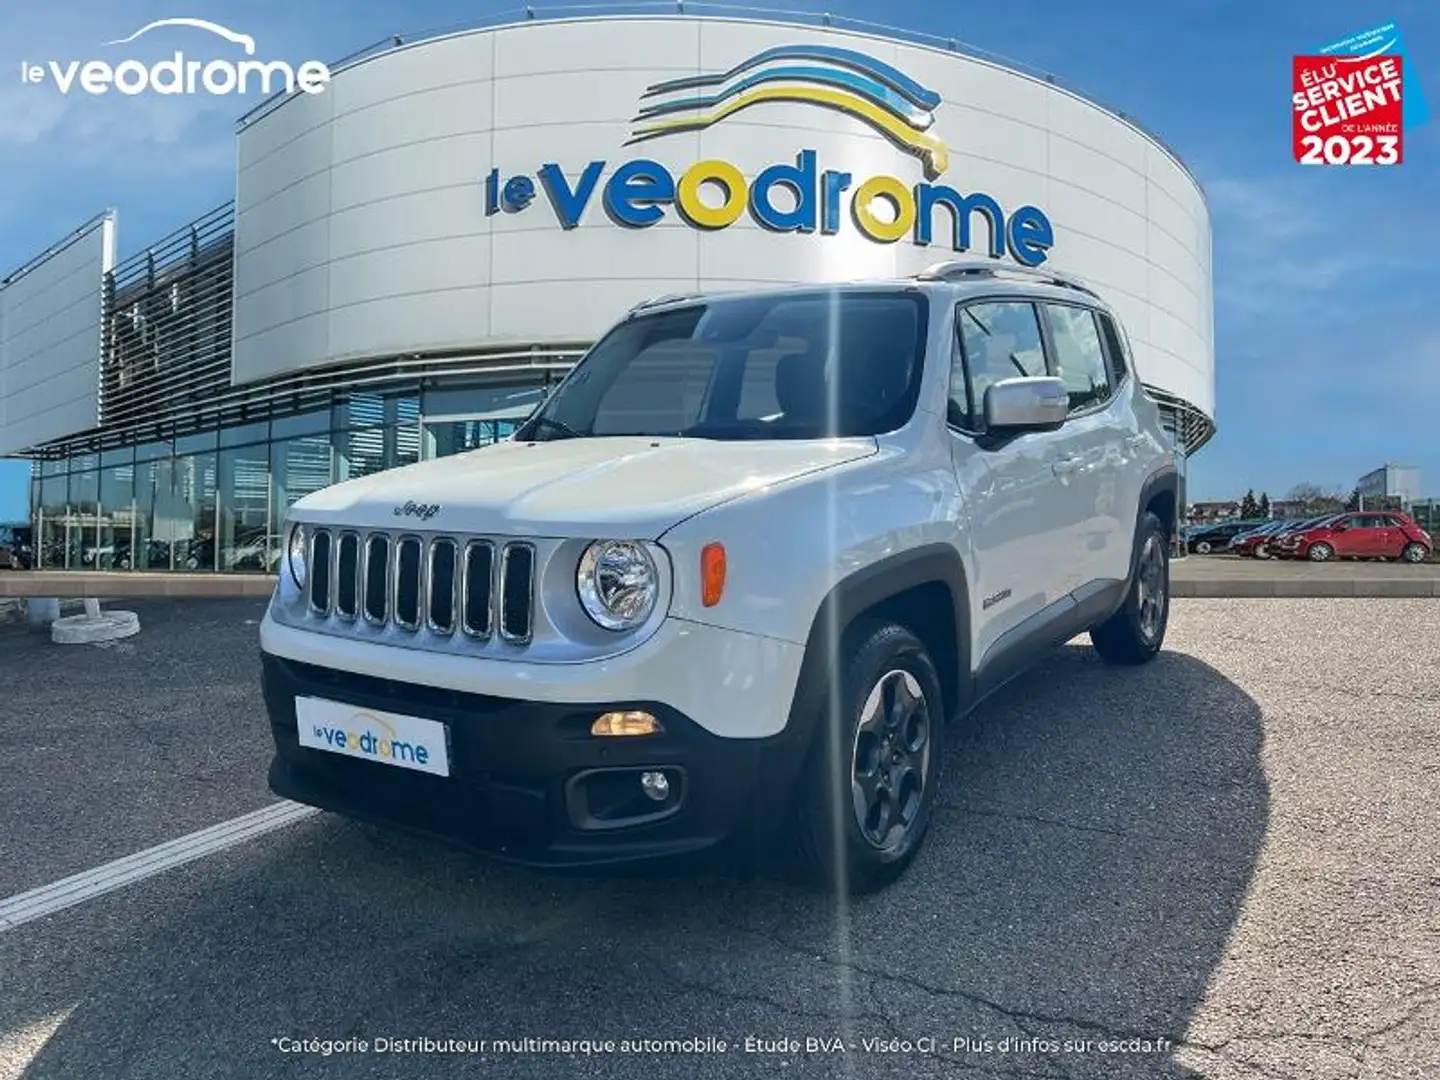 Jeep Renegade 1.4 MultiAir S/S 140ch Limited - 1